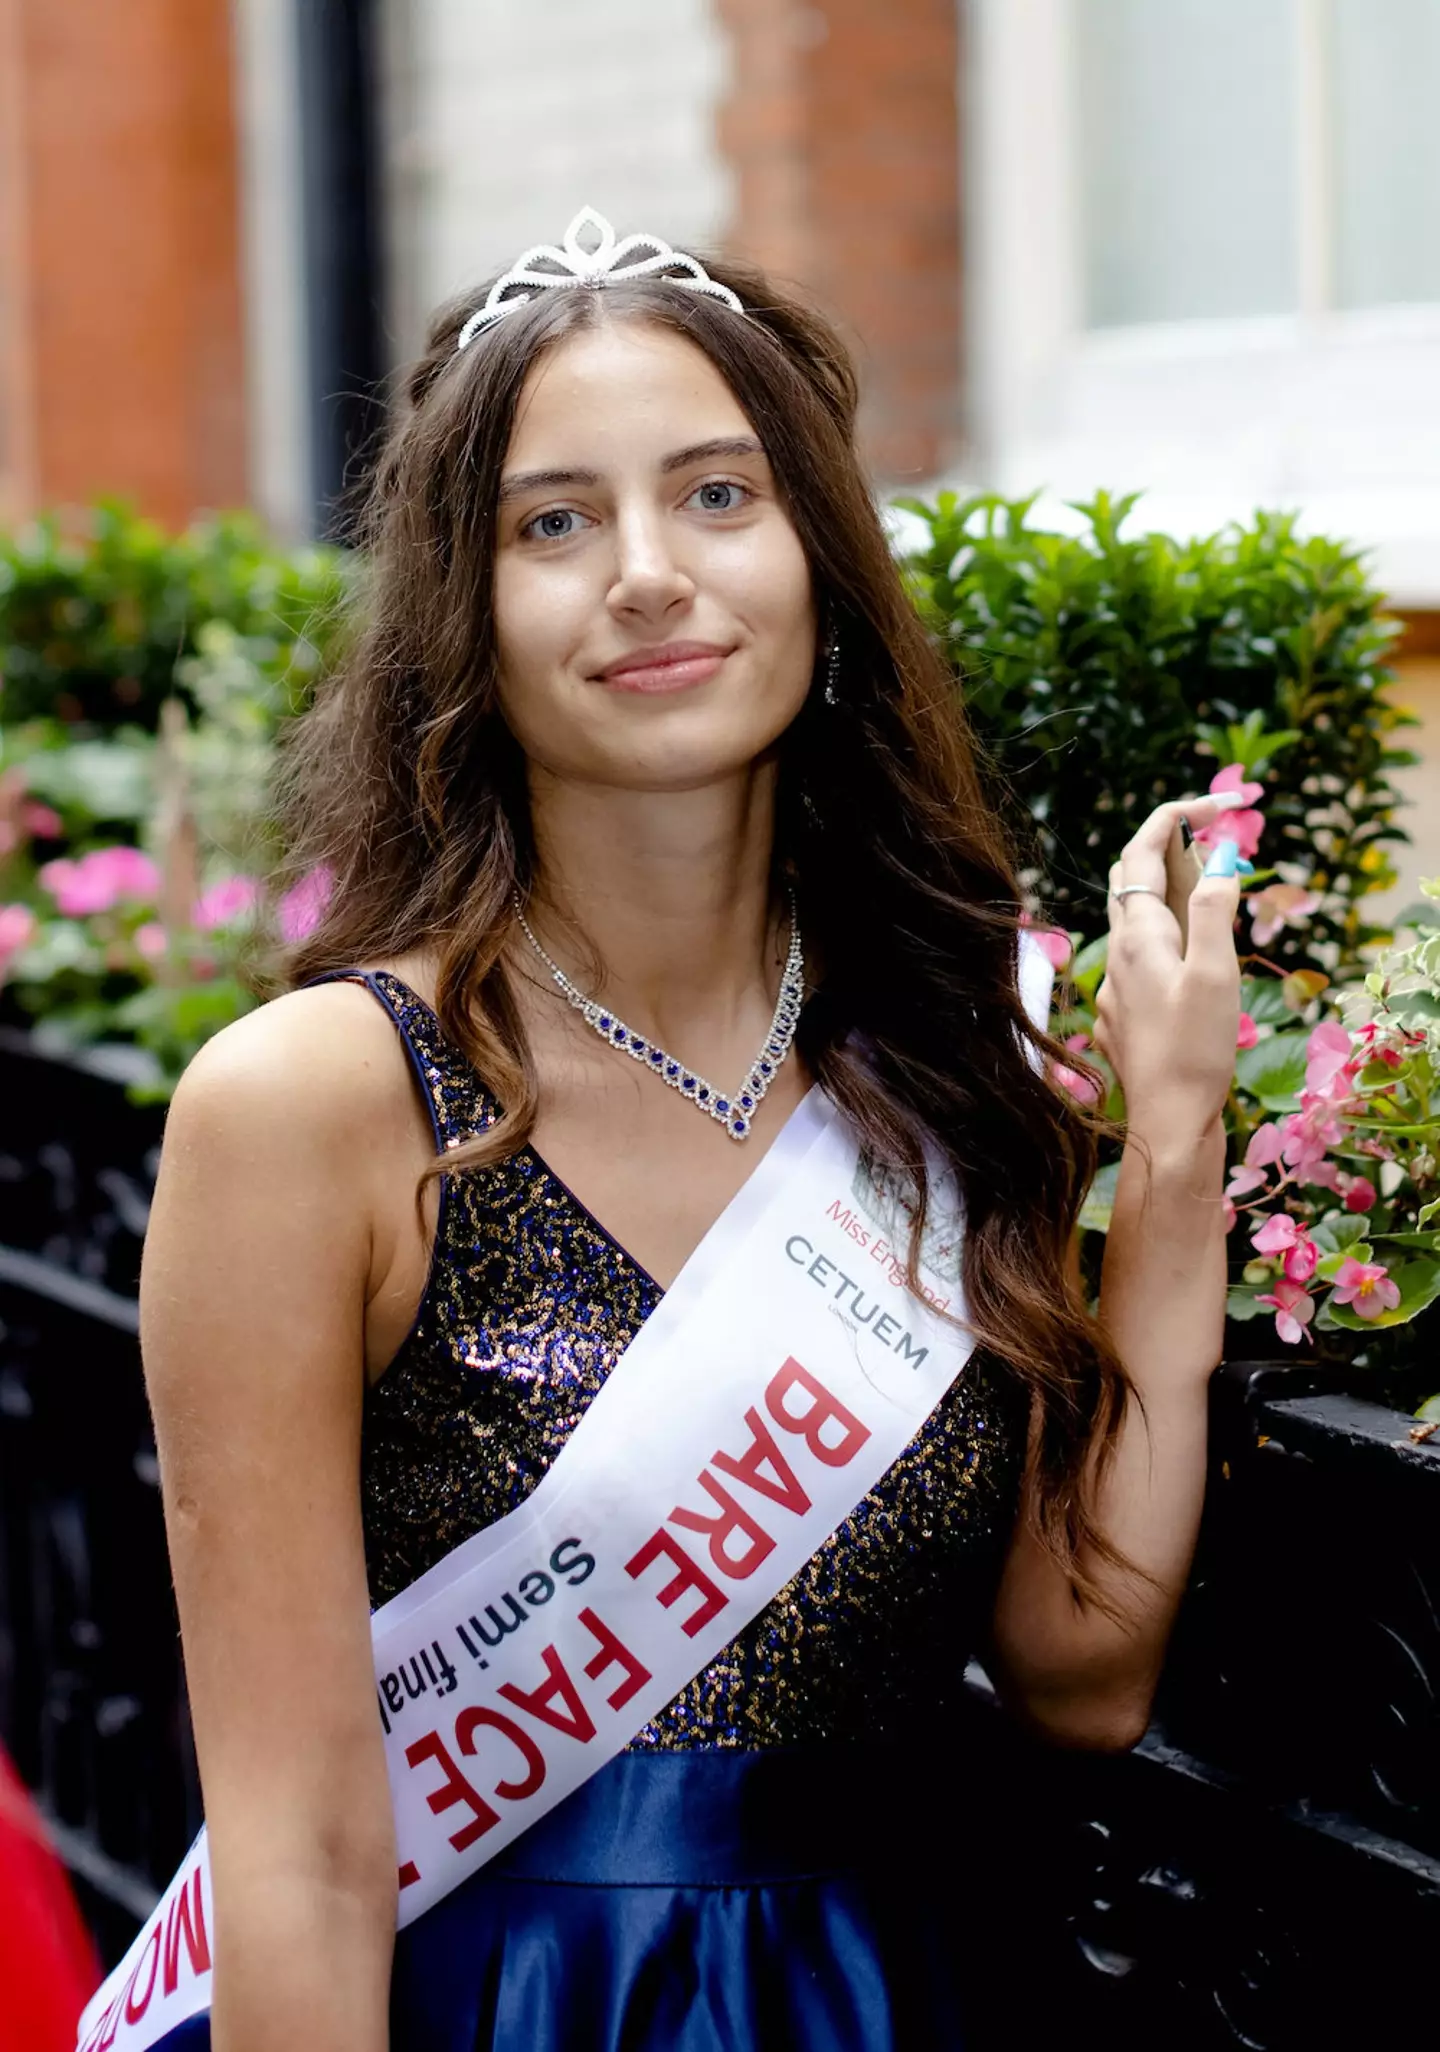 The beauty pageant contestant is the first to go bare-faced in Miss England's 94-year history.